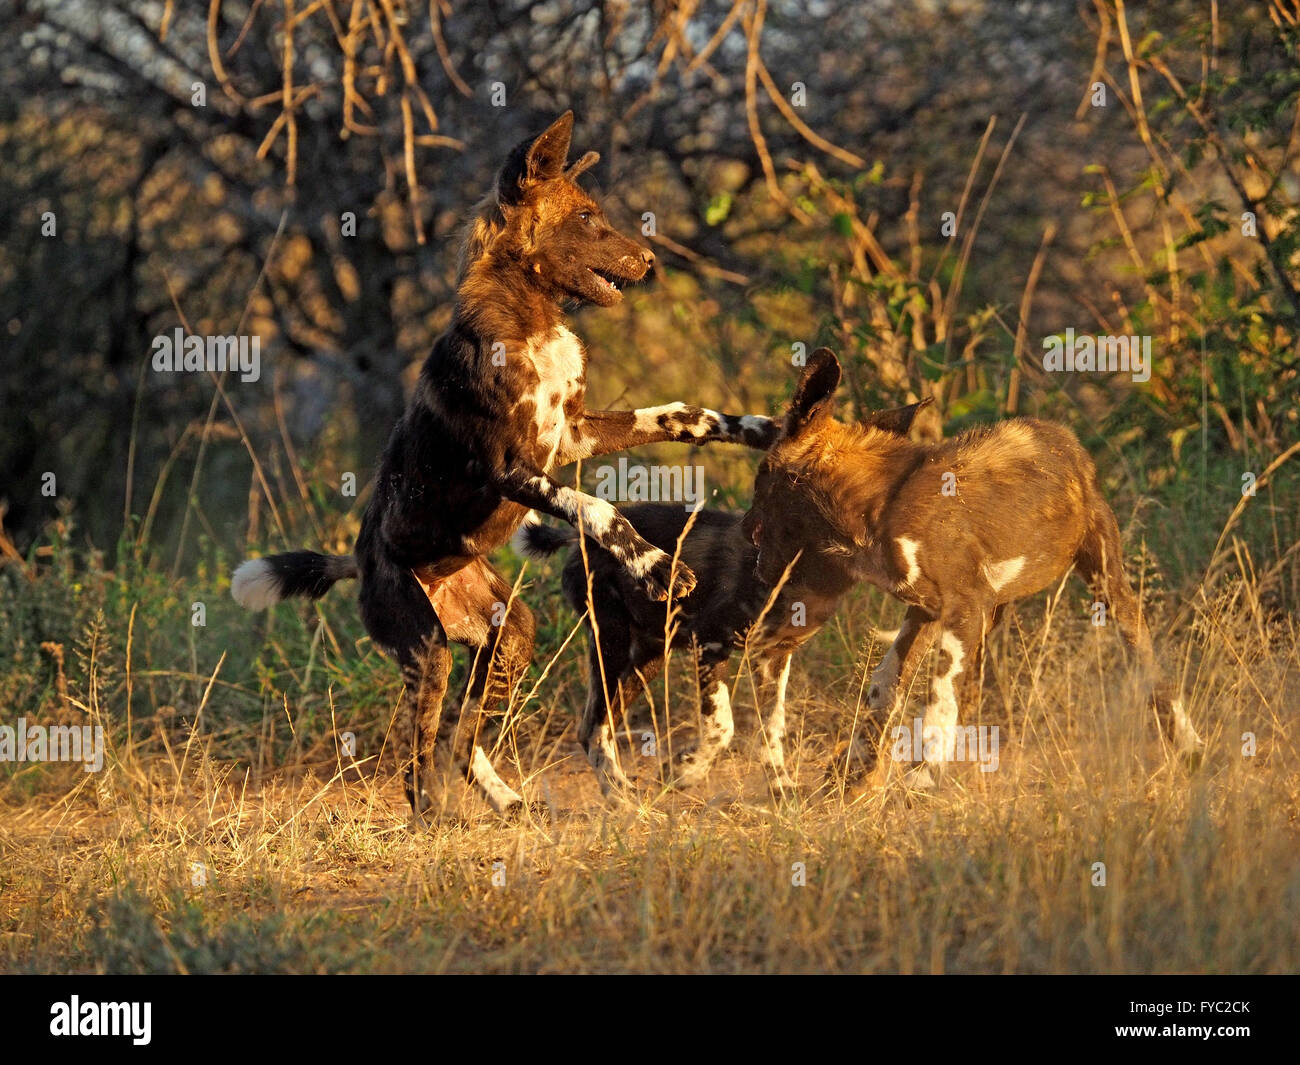 play fight interaction of three African Wild dogs / Painted Wolves (Lycaon Pictus) photographed at ground level in thick scrubby bush Stock Photo